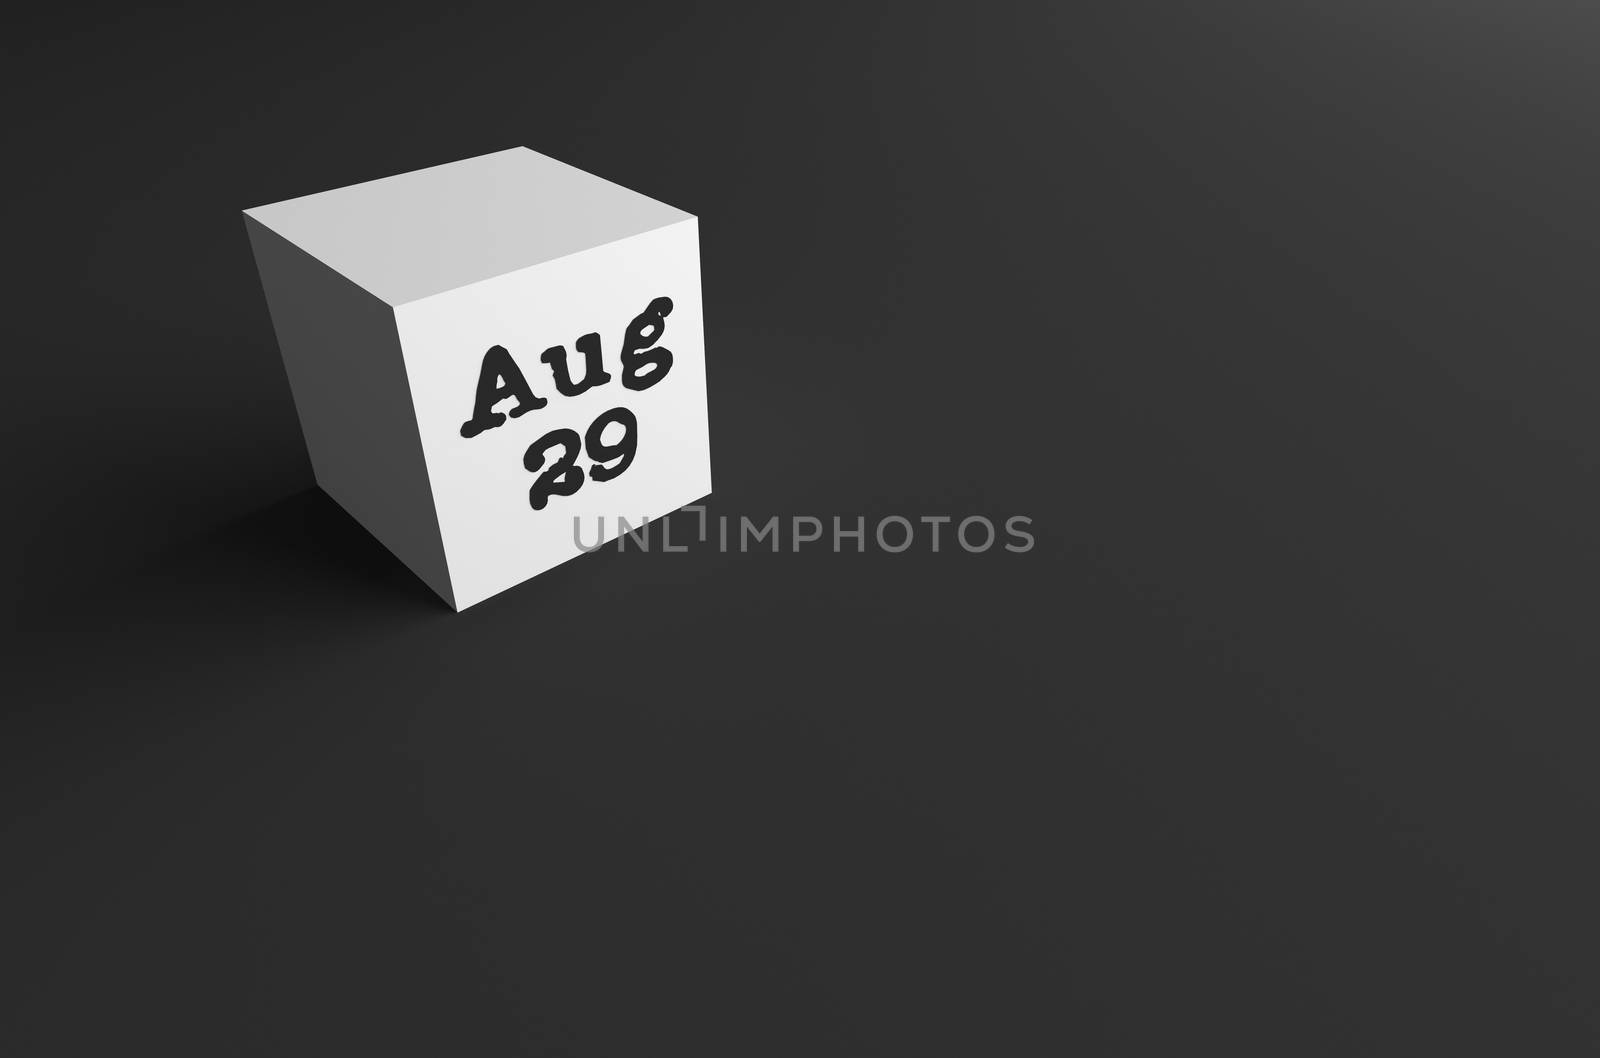 3D RENDERING OF Aug (ABBREVIATION OF AUGUST) 29 ON WHITE CUBE